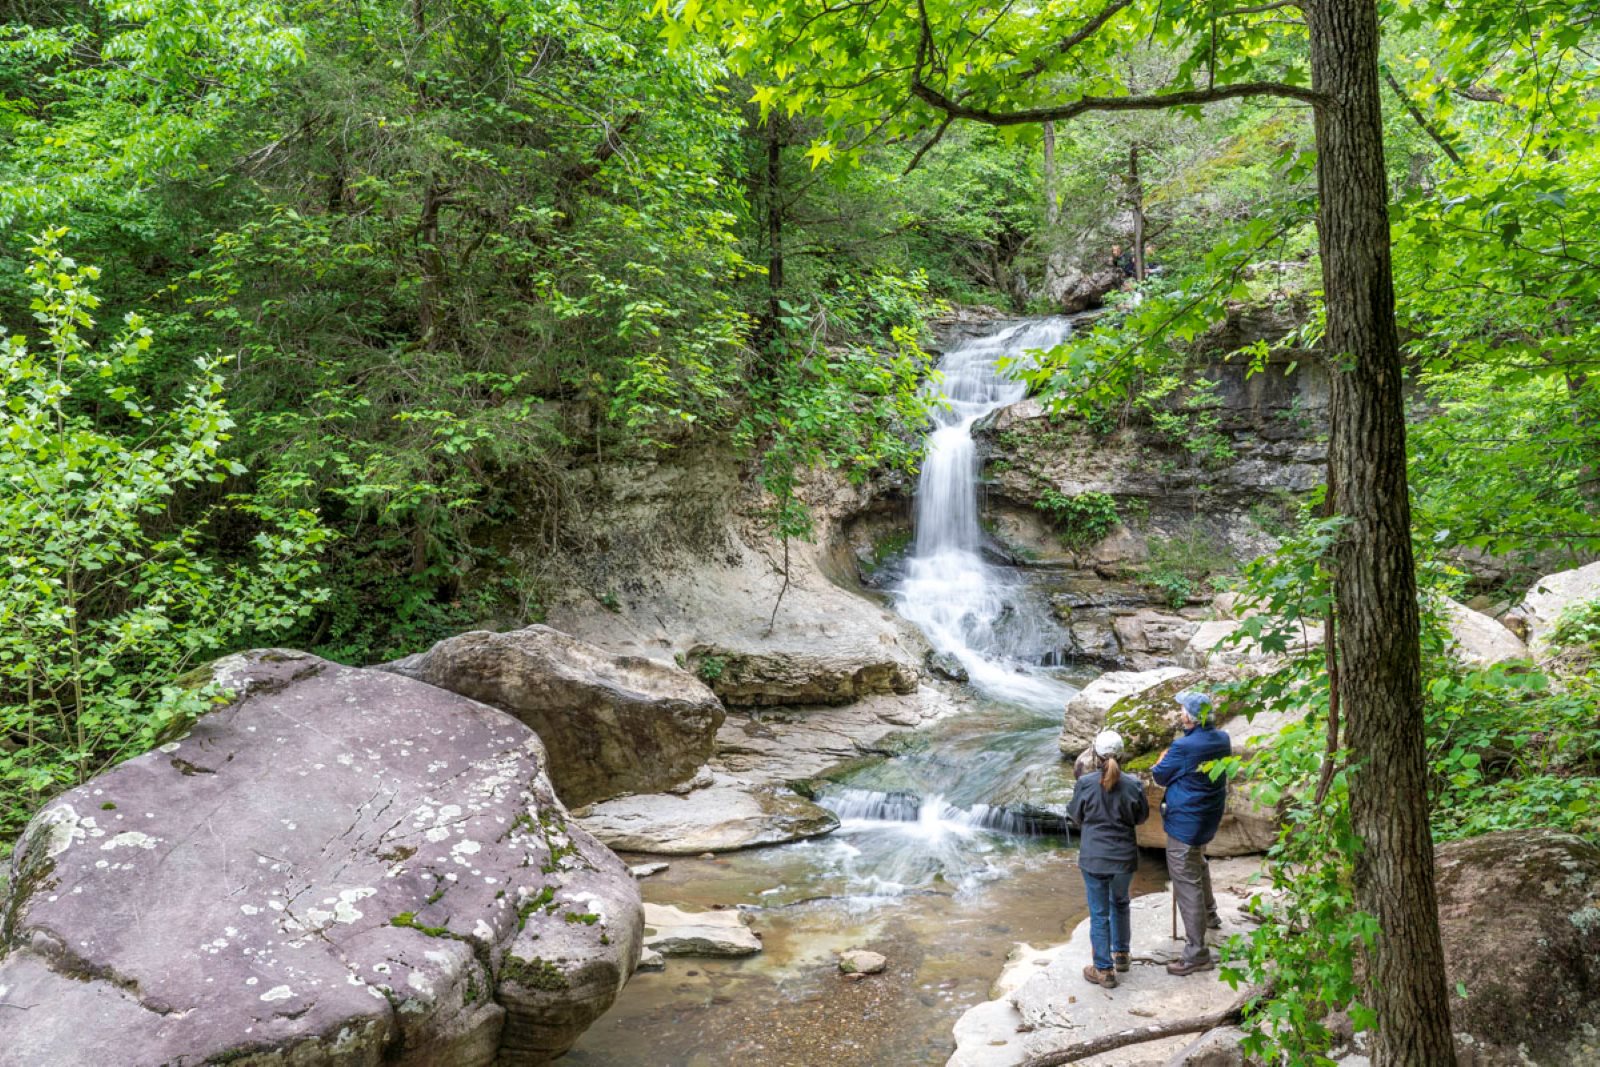 Hikers reach a nice spot to view Broadwater Hollow Falls near the Buffalo National River in northwest Arkansas. (Photo by Sony Hocklander)